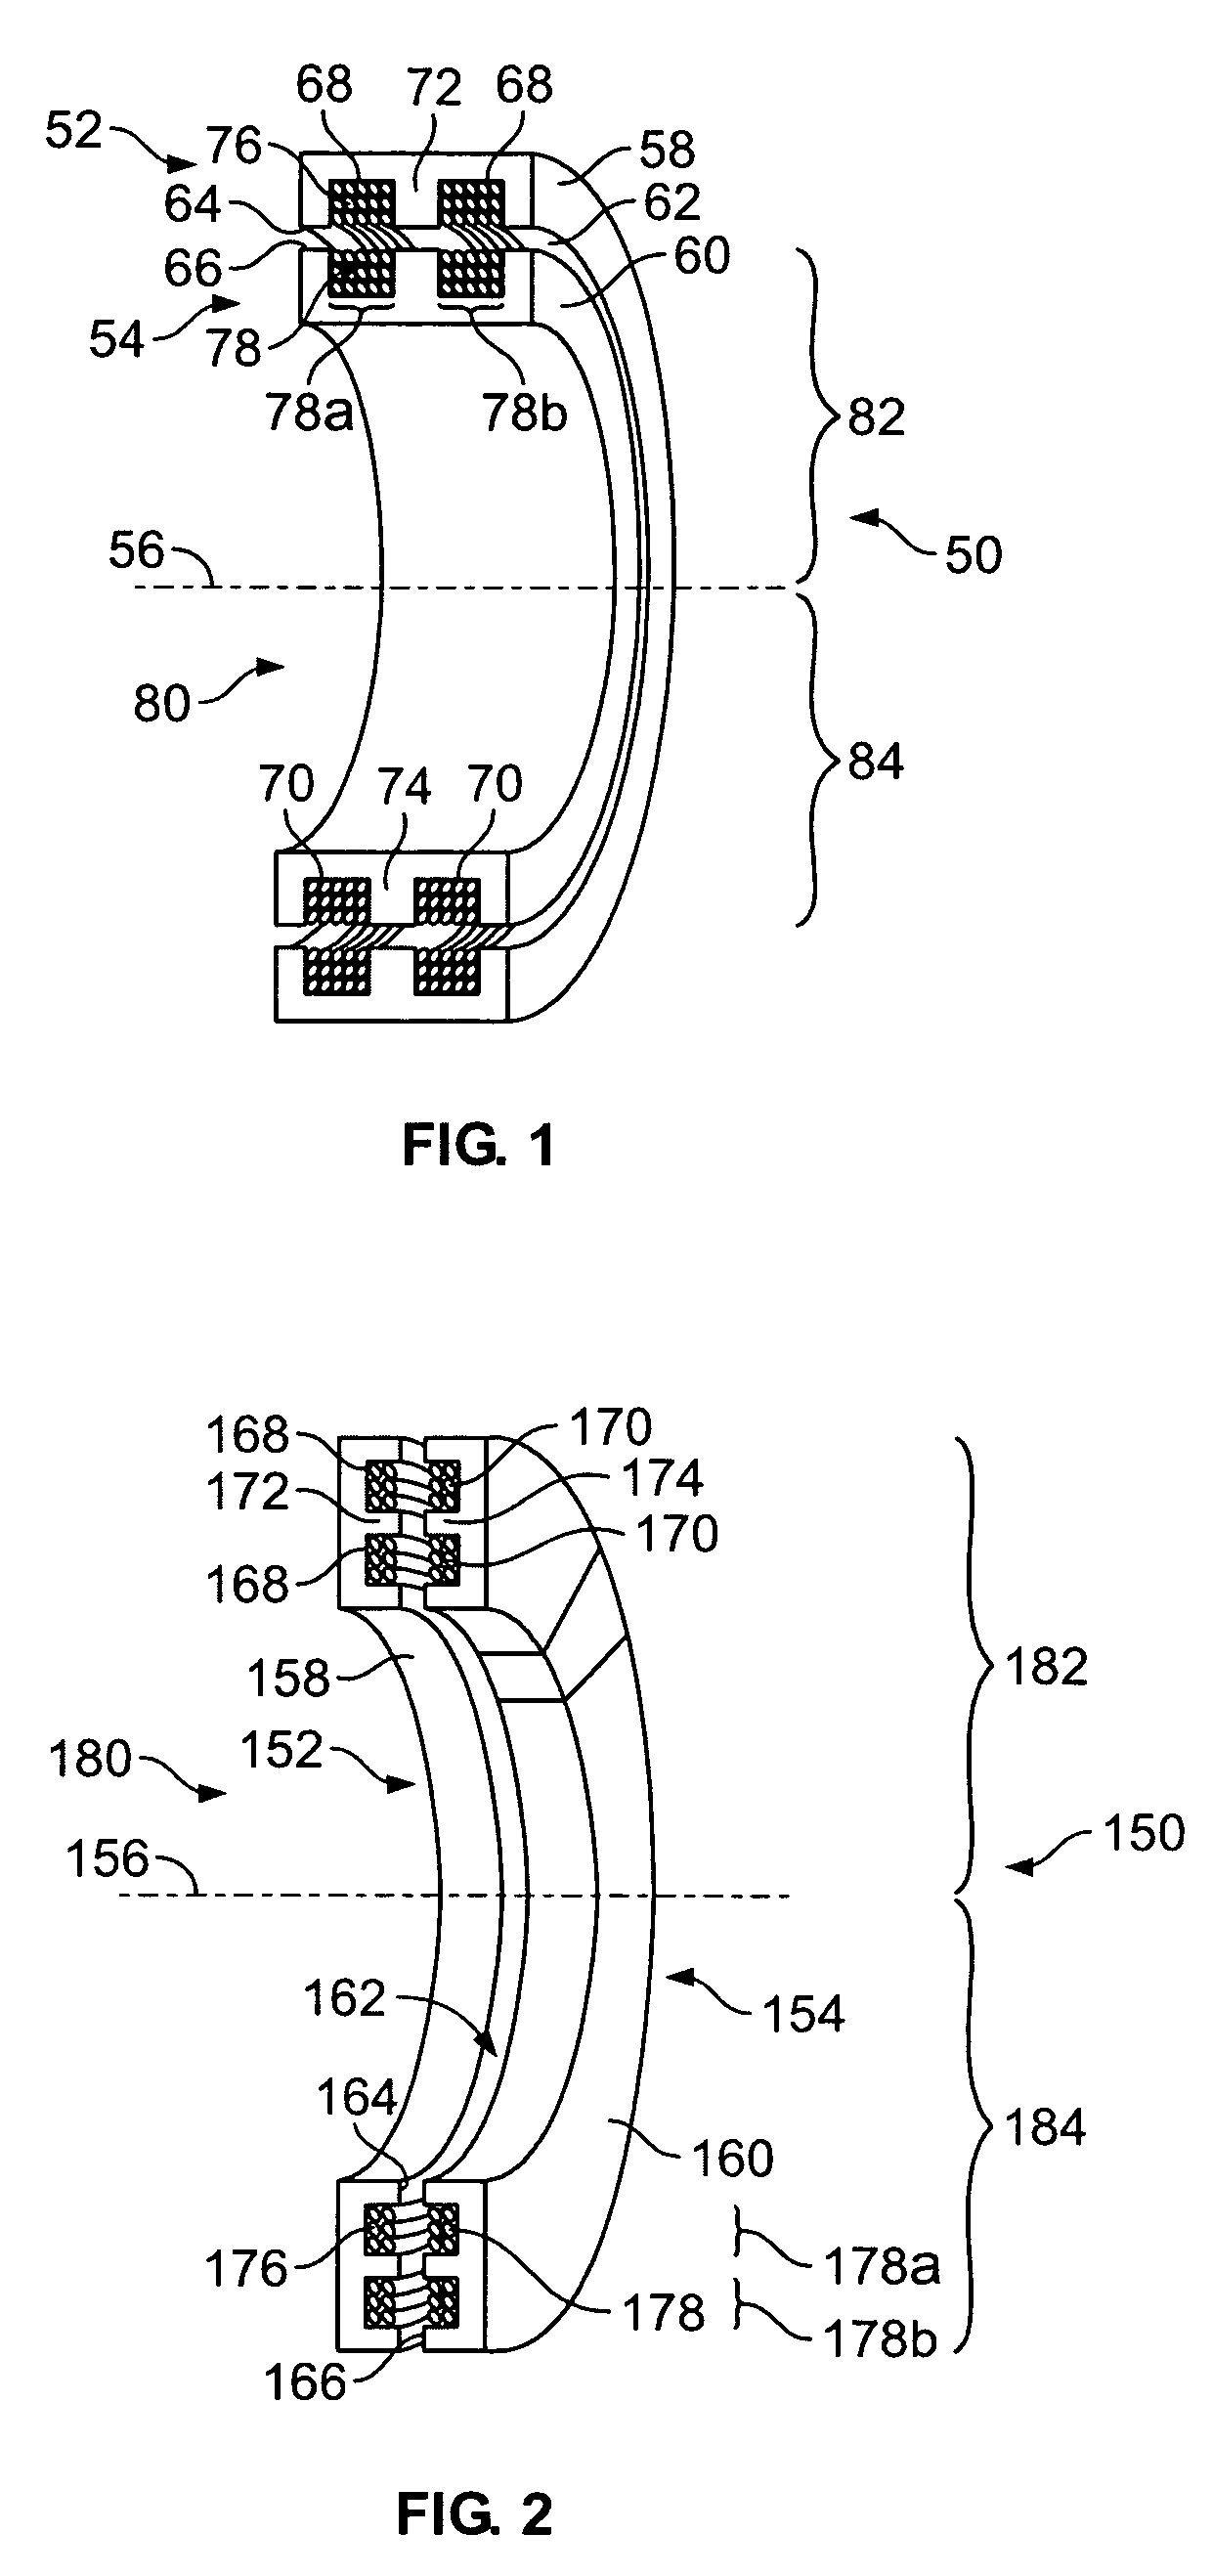 Contactless power transfer system